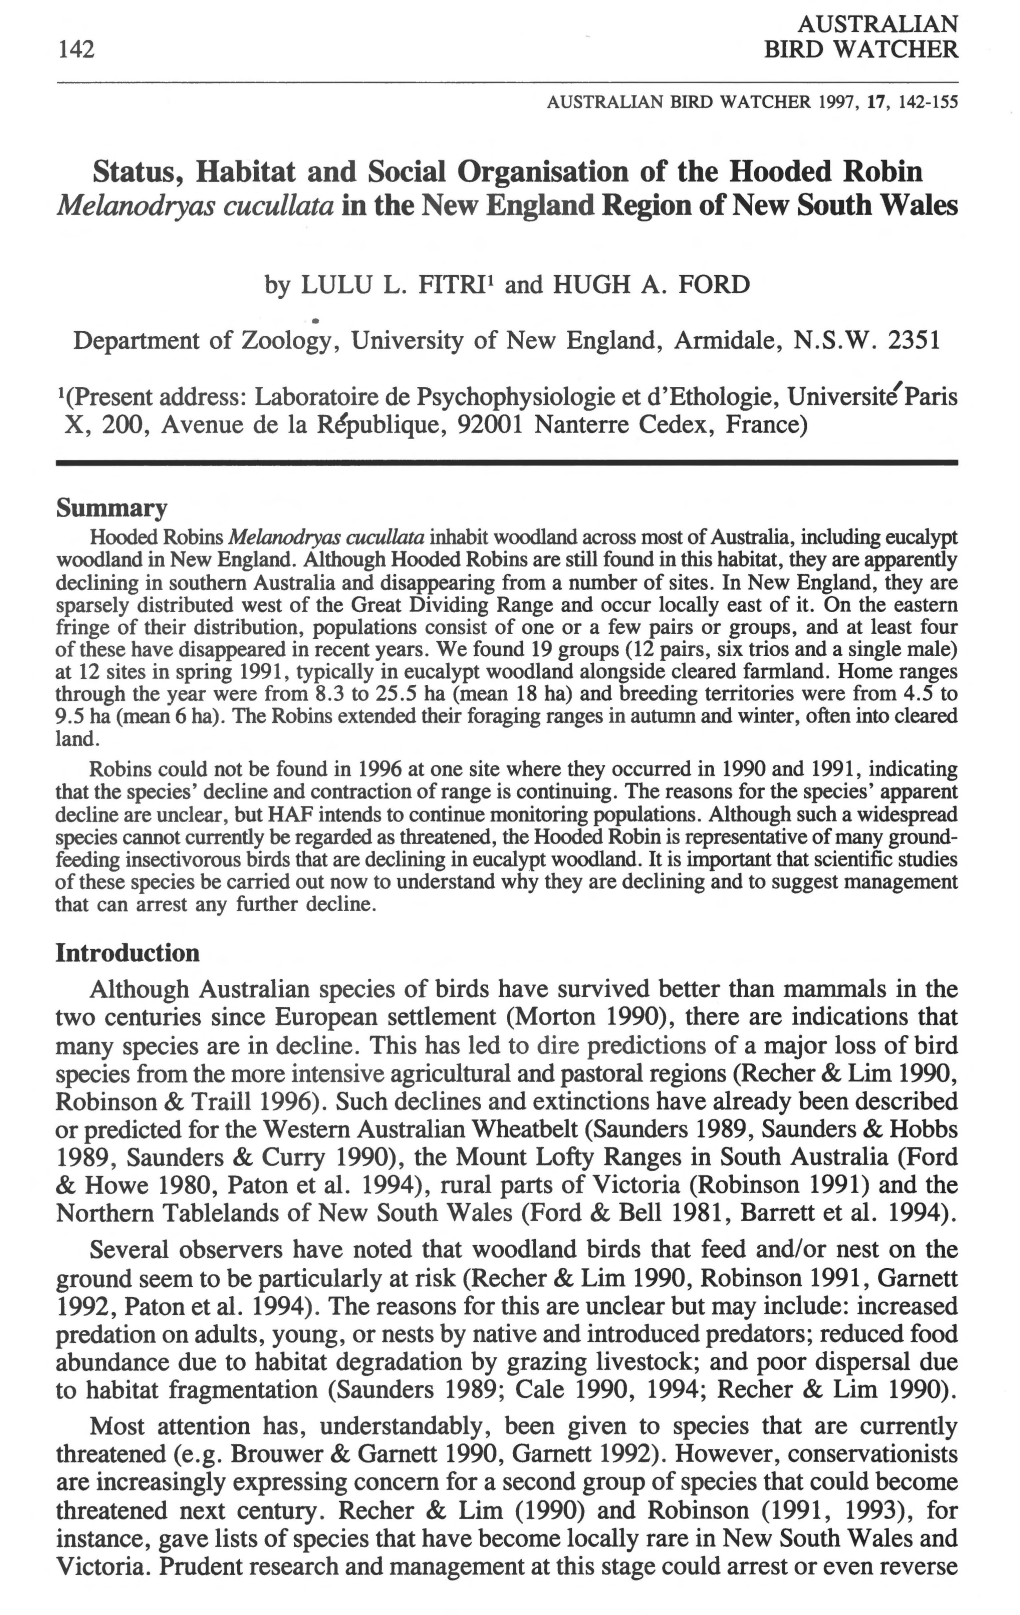 Status, Habitat and Social Organisation of the Hooded Robin Melanodryas Cucullata in the New England Region of New South Wales